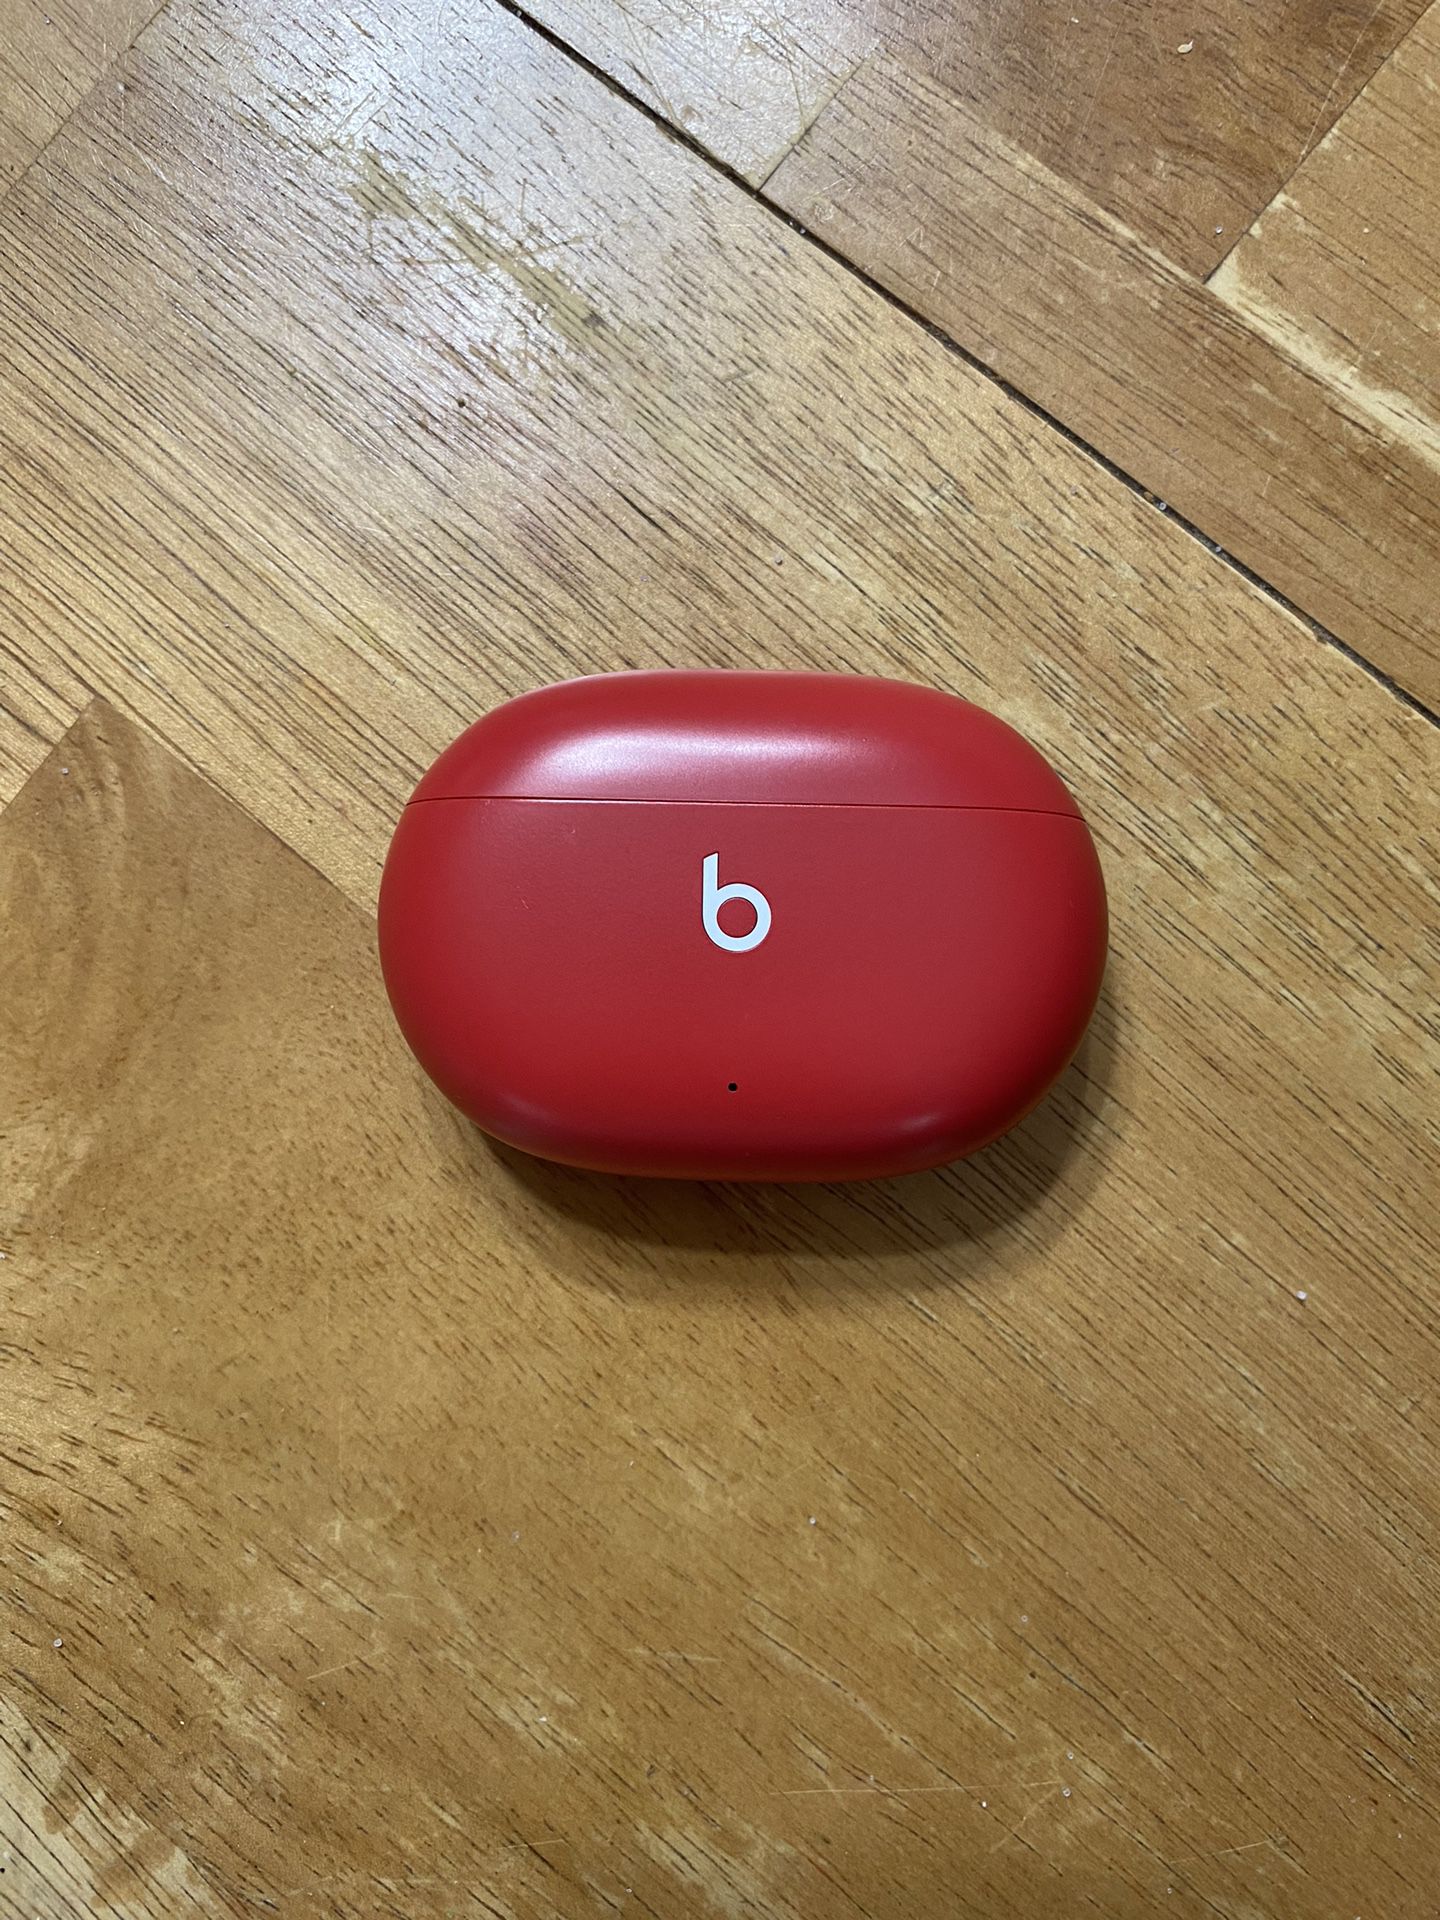 Beats Studio Buds True Wireless Noise Cancelling Bluetooth Earbuds - Red